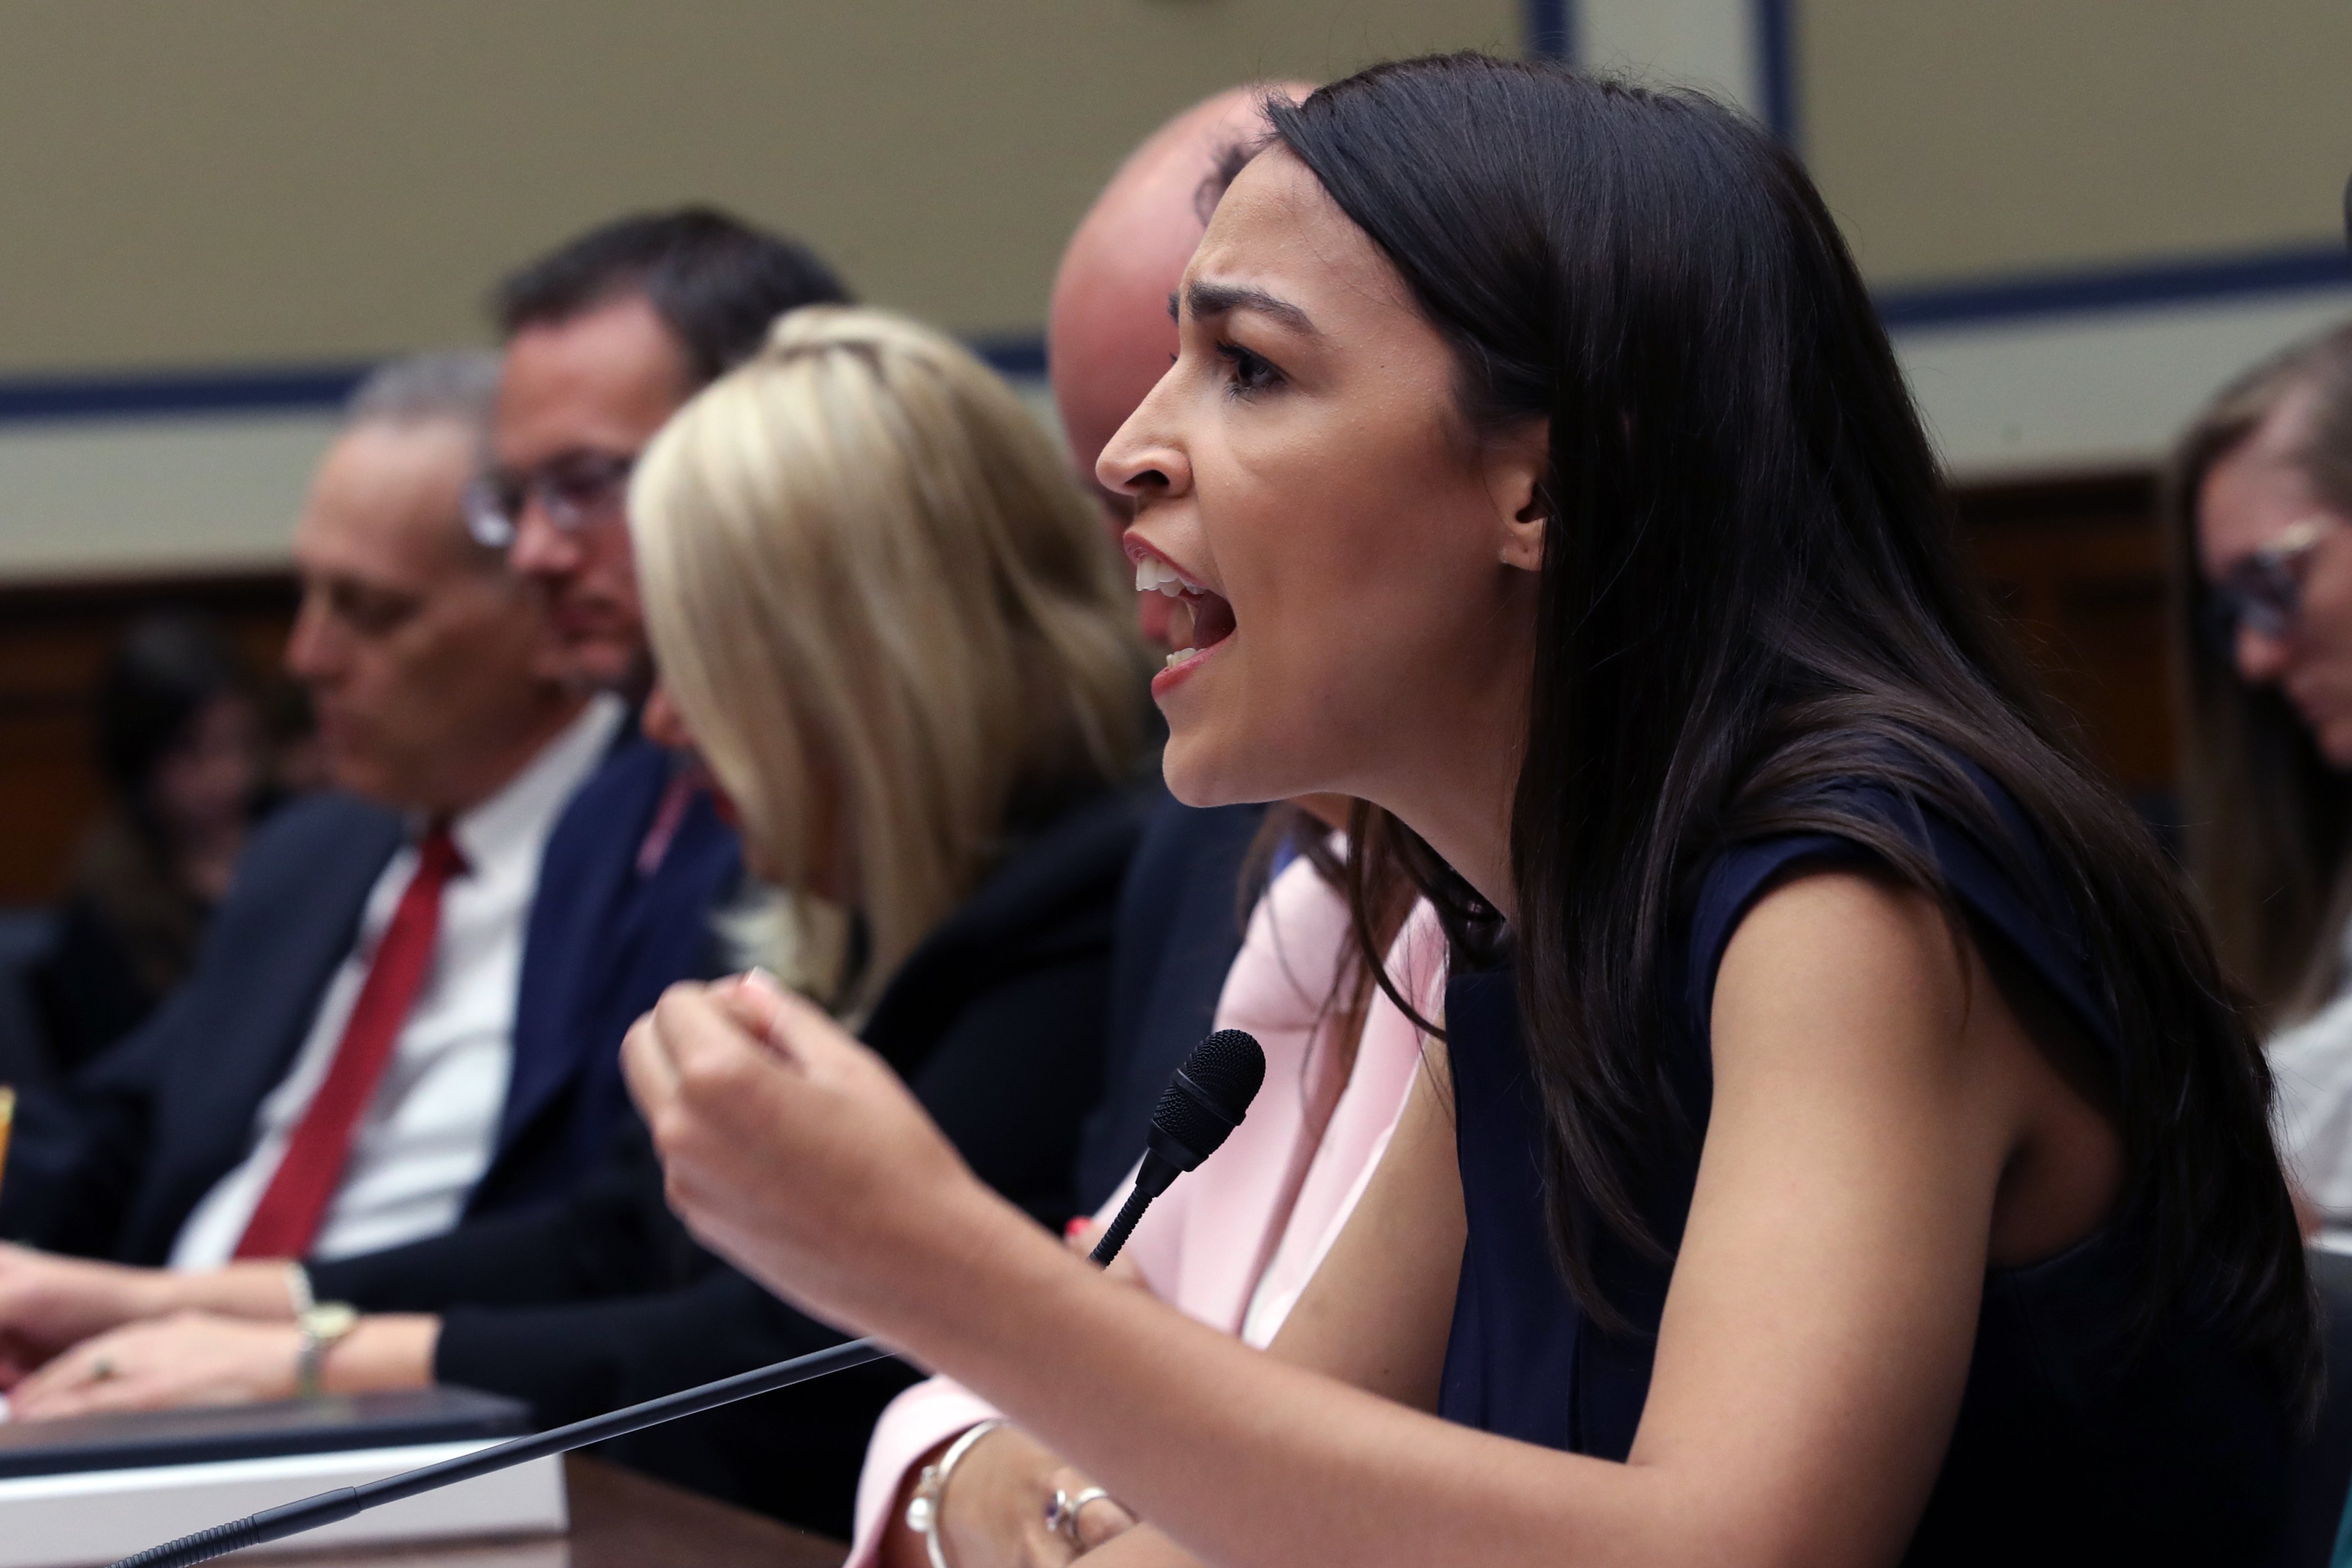 U.S. Rep. Alexandria Ocasio-Cortez (D-NY) speaks during a House Oversight and Reform Committee holds a hearing on "The Trump Administration's Child Separation Policy: Substantiated Allegations of Mistreatment." (Win McNamee/Getty Images)